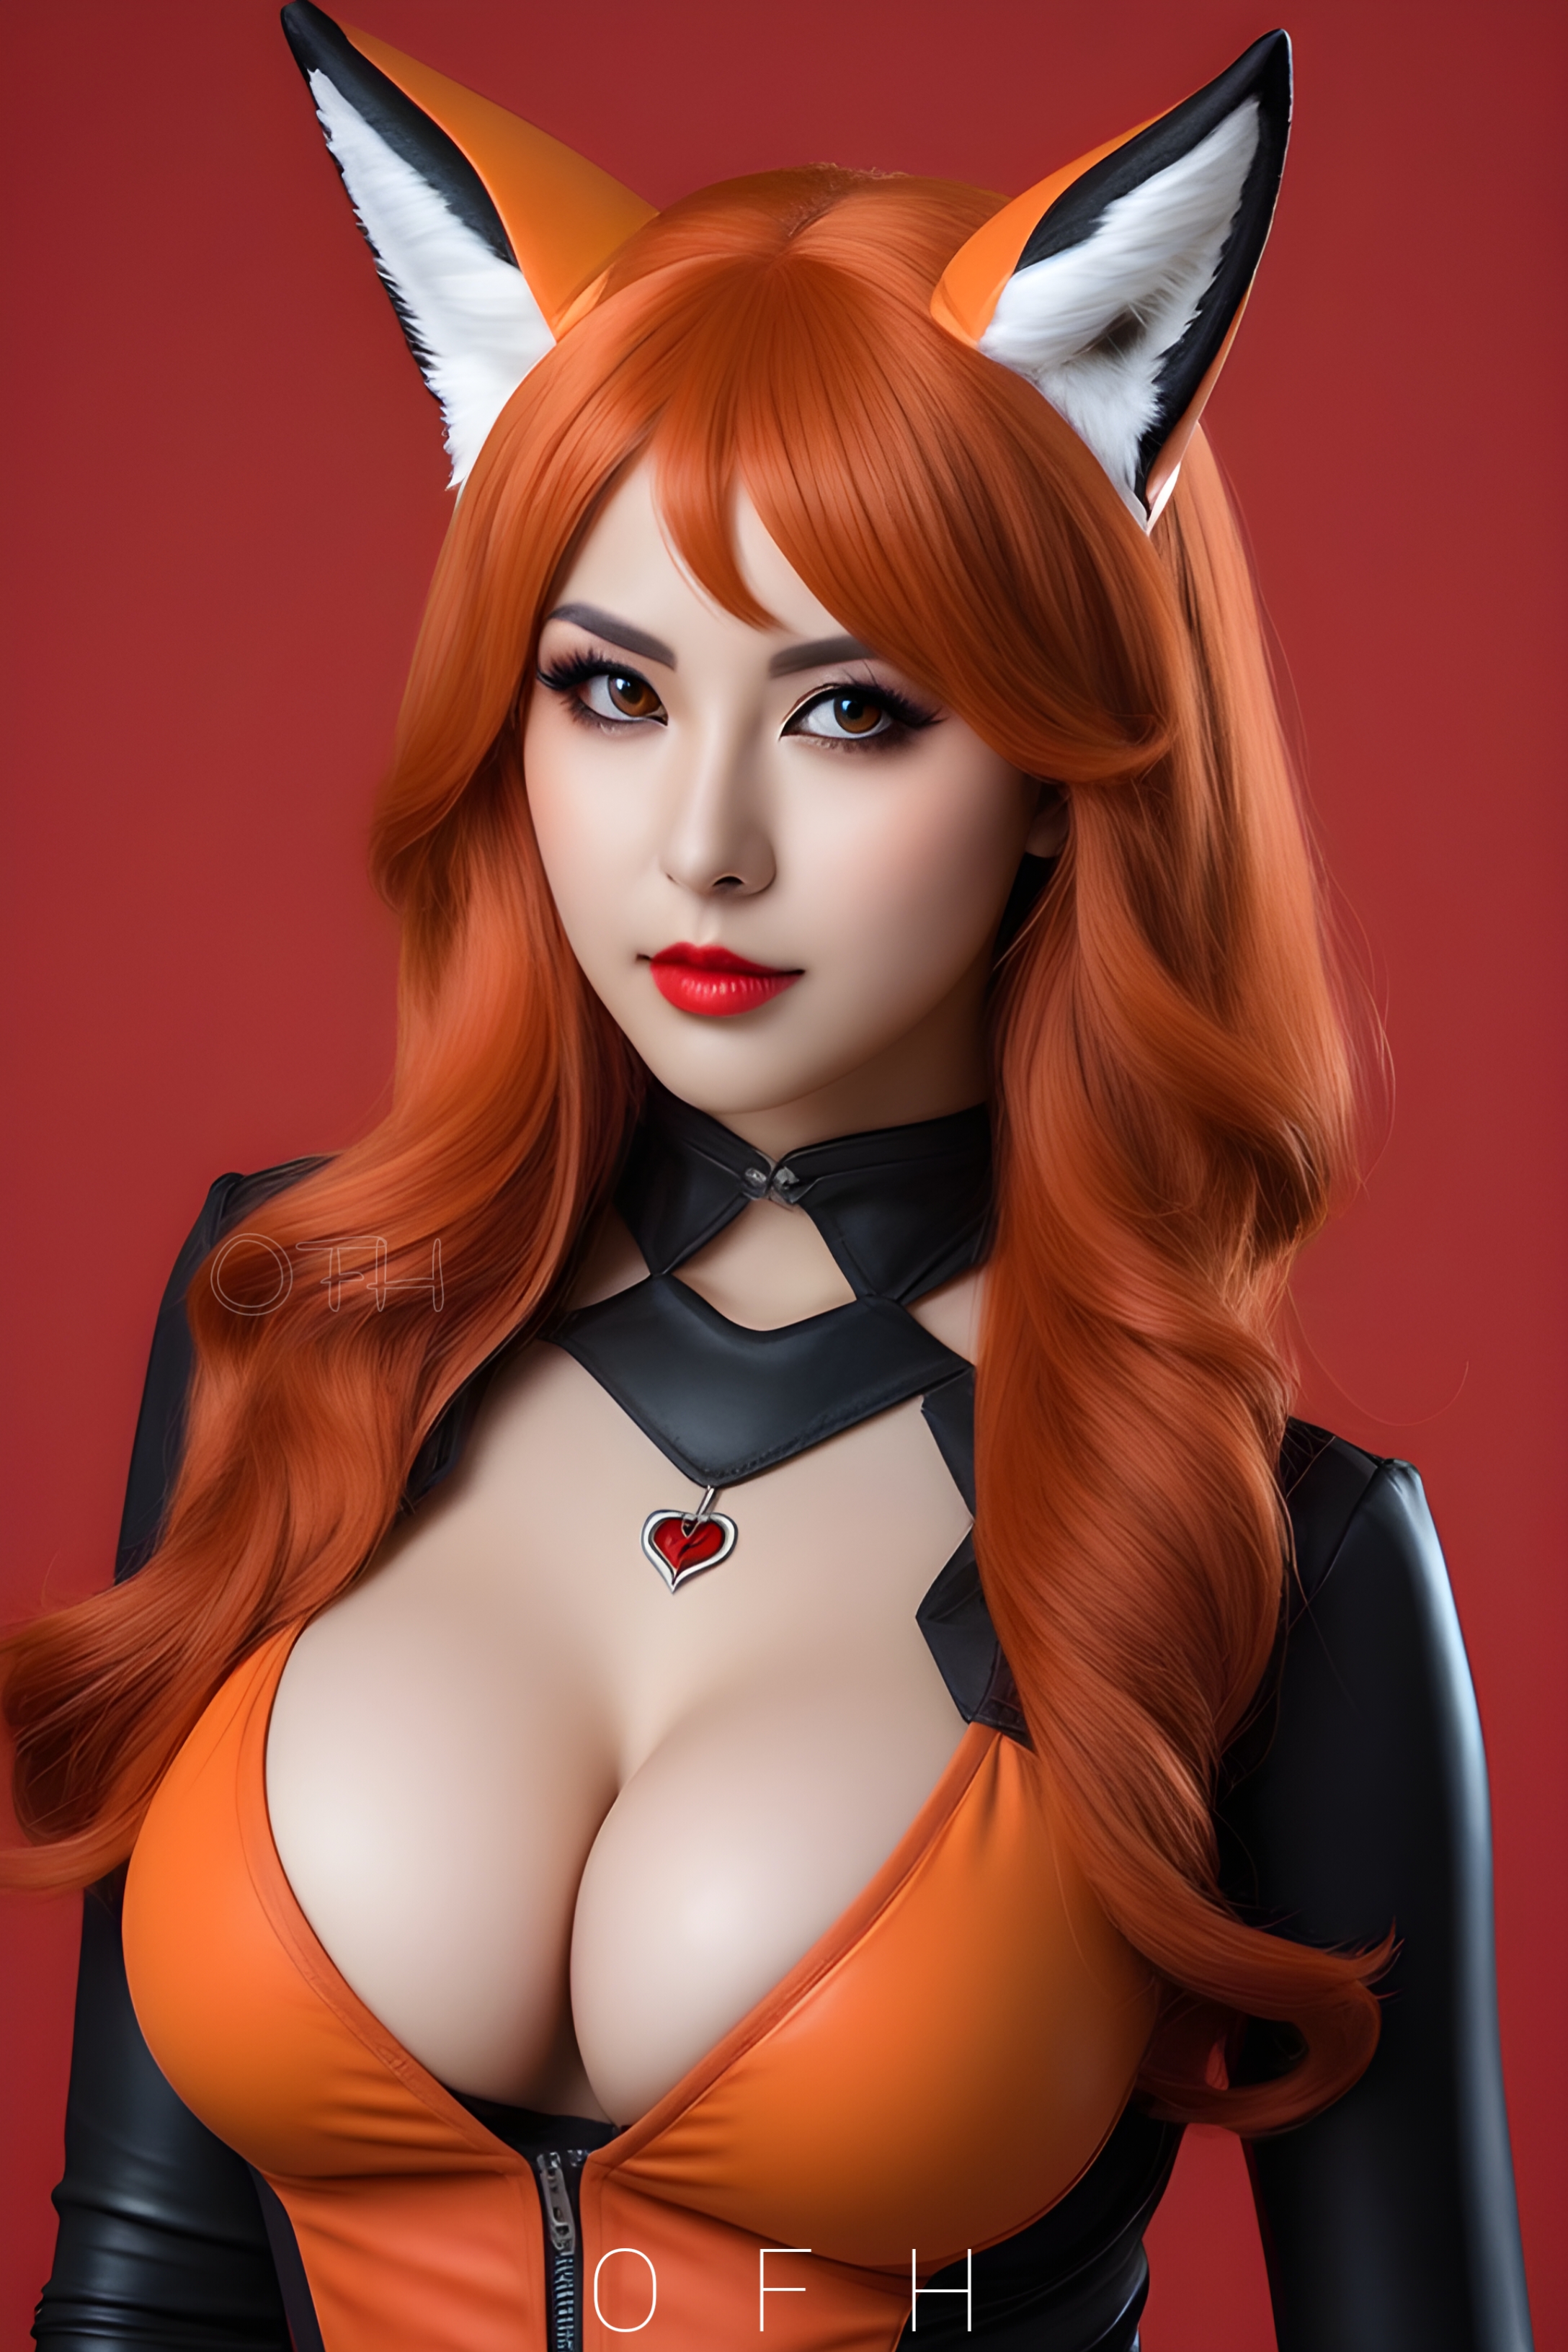 General 2176x3264 OneFinalHug AI art Fox woman fictional cosplay looking at viewer huge breasts Asian digital art fantasy art cleavage minimalism simple background lipstick closed mouth long hair fox ears